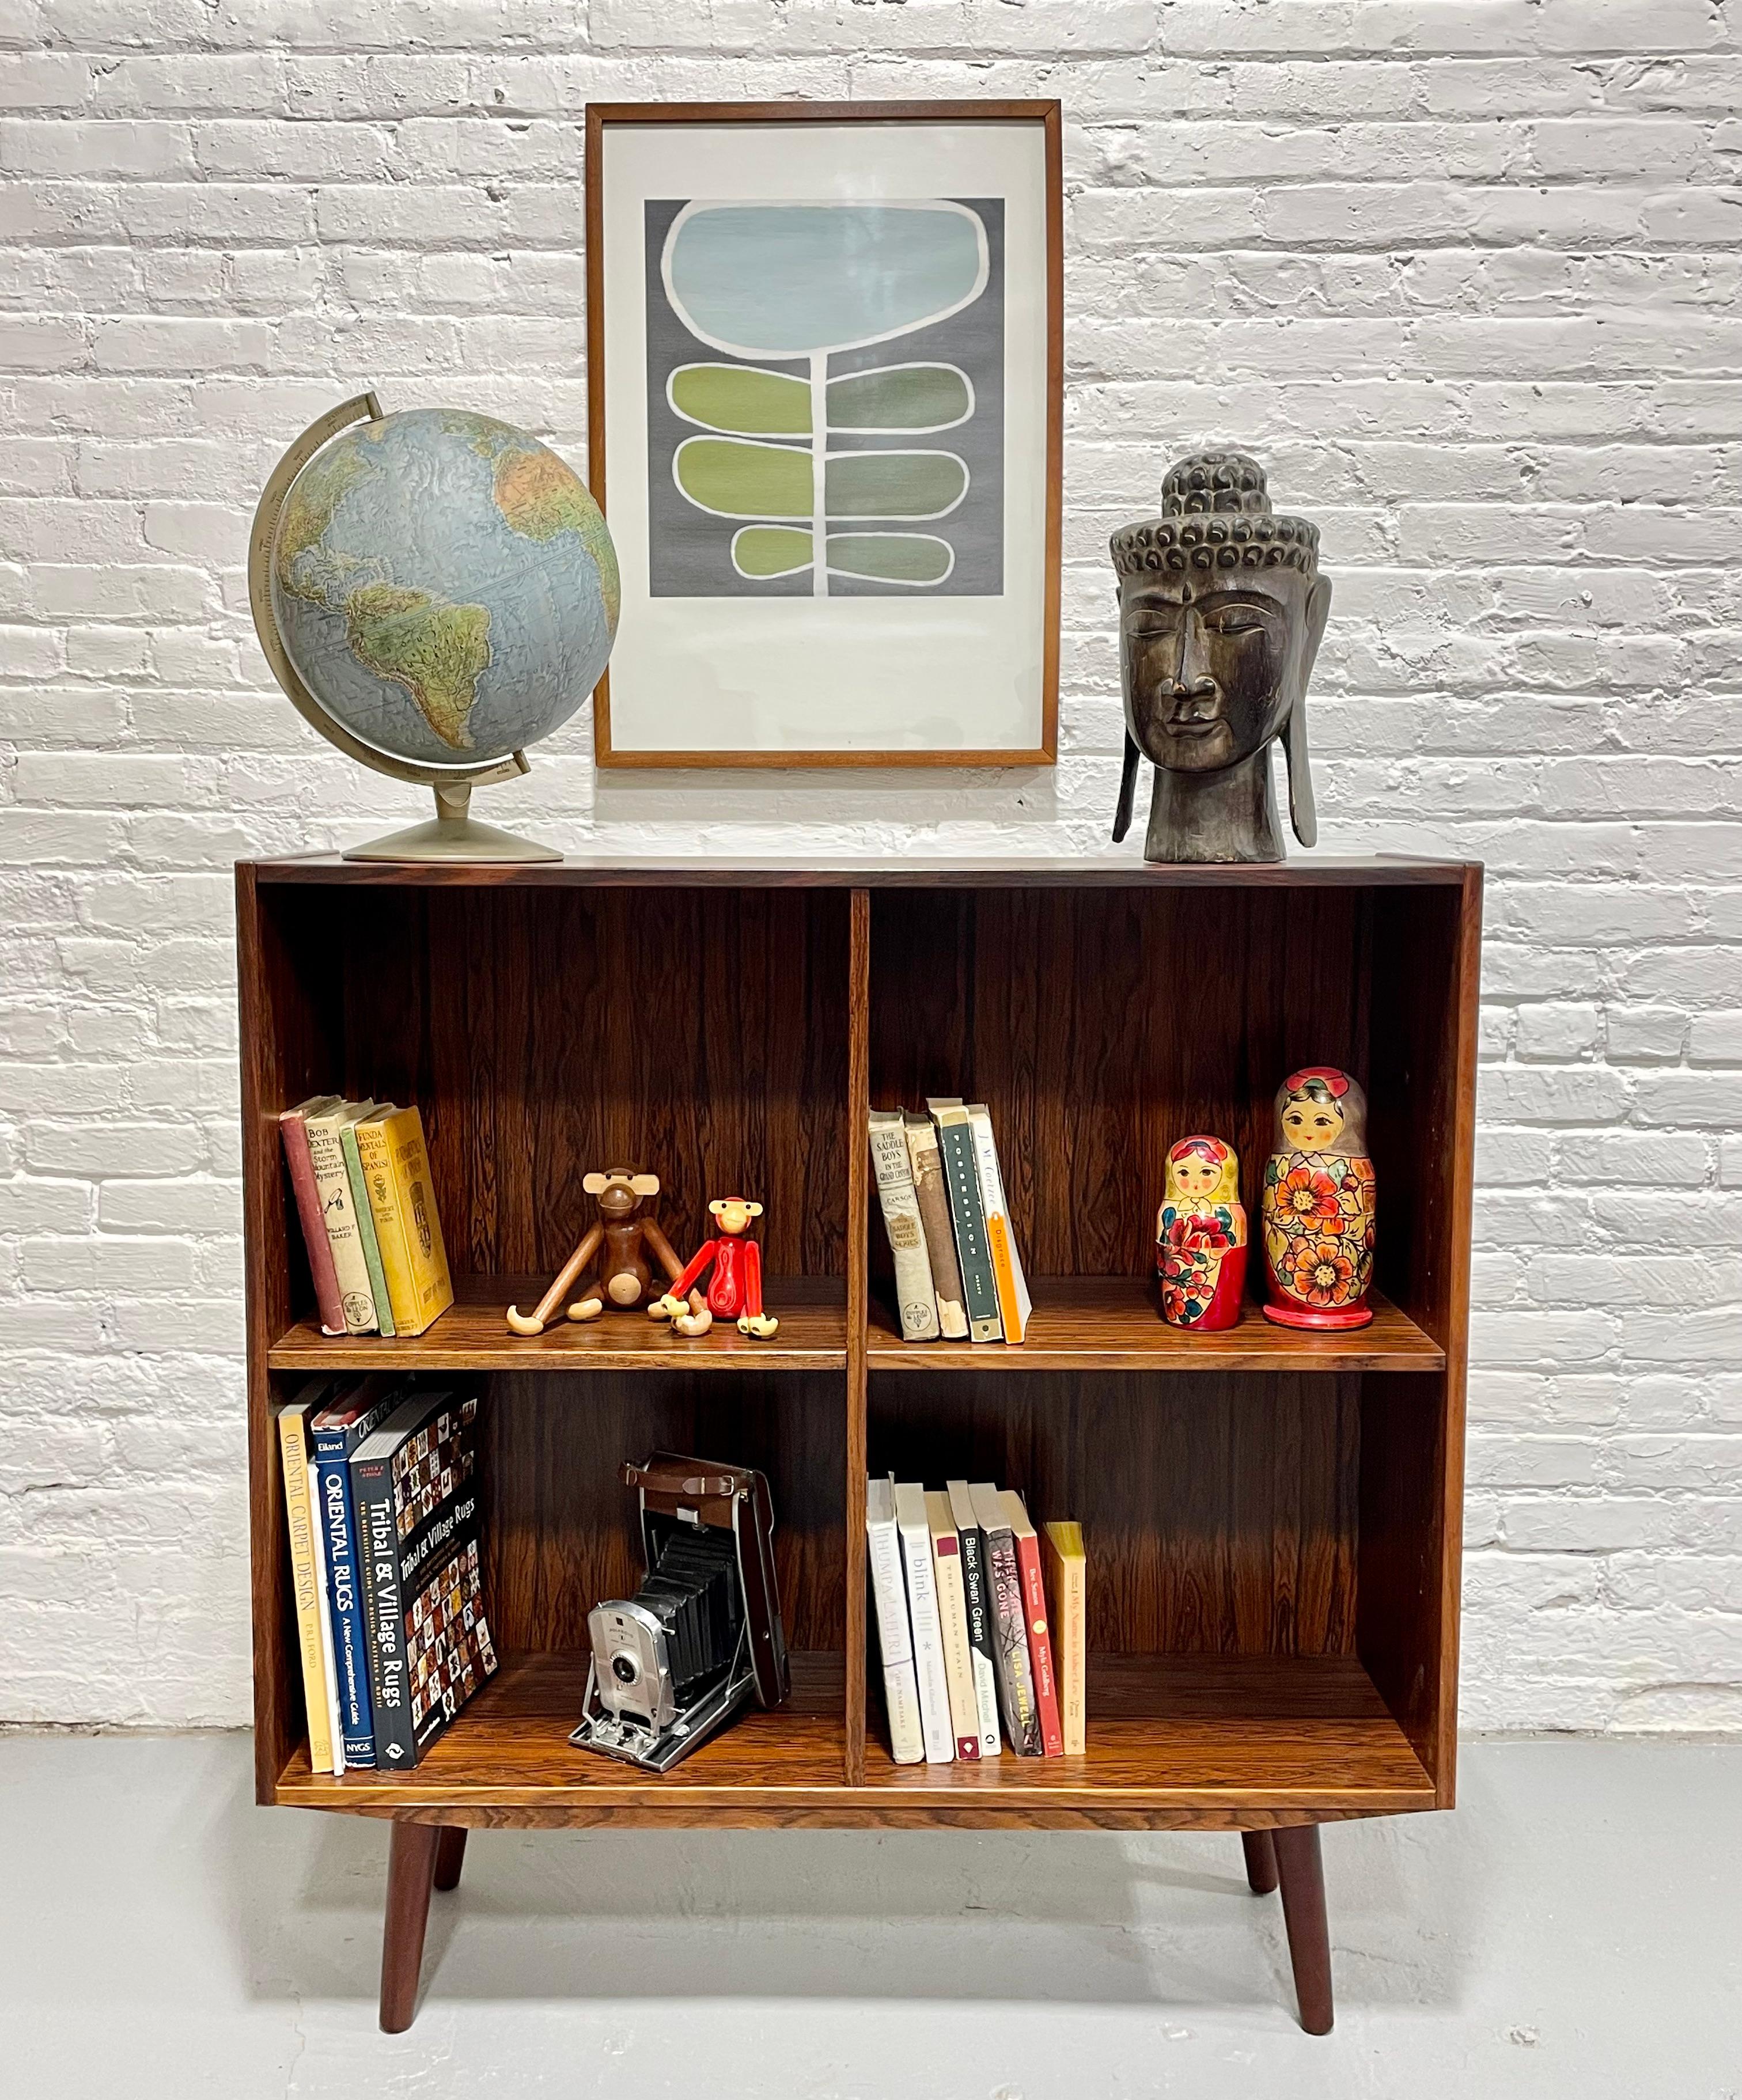 Danish Mid Century Modern Rosewood Bookcase / Vinyl Storage, c. 1960’s.  Loads of storage for all your books and collectables or vinyl collection across the four adjustable shelving areas.   Constructed in rosewood and its deep, rich color and